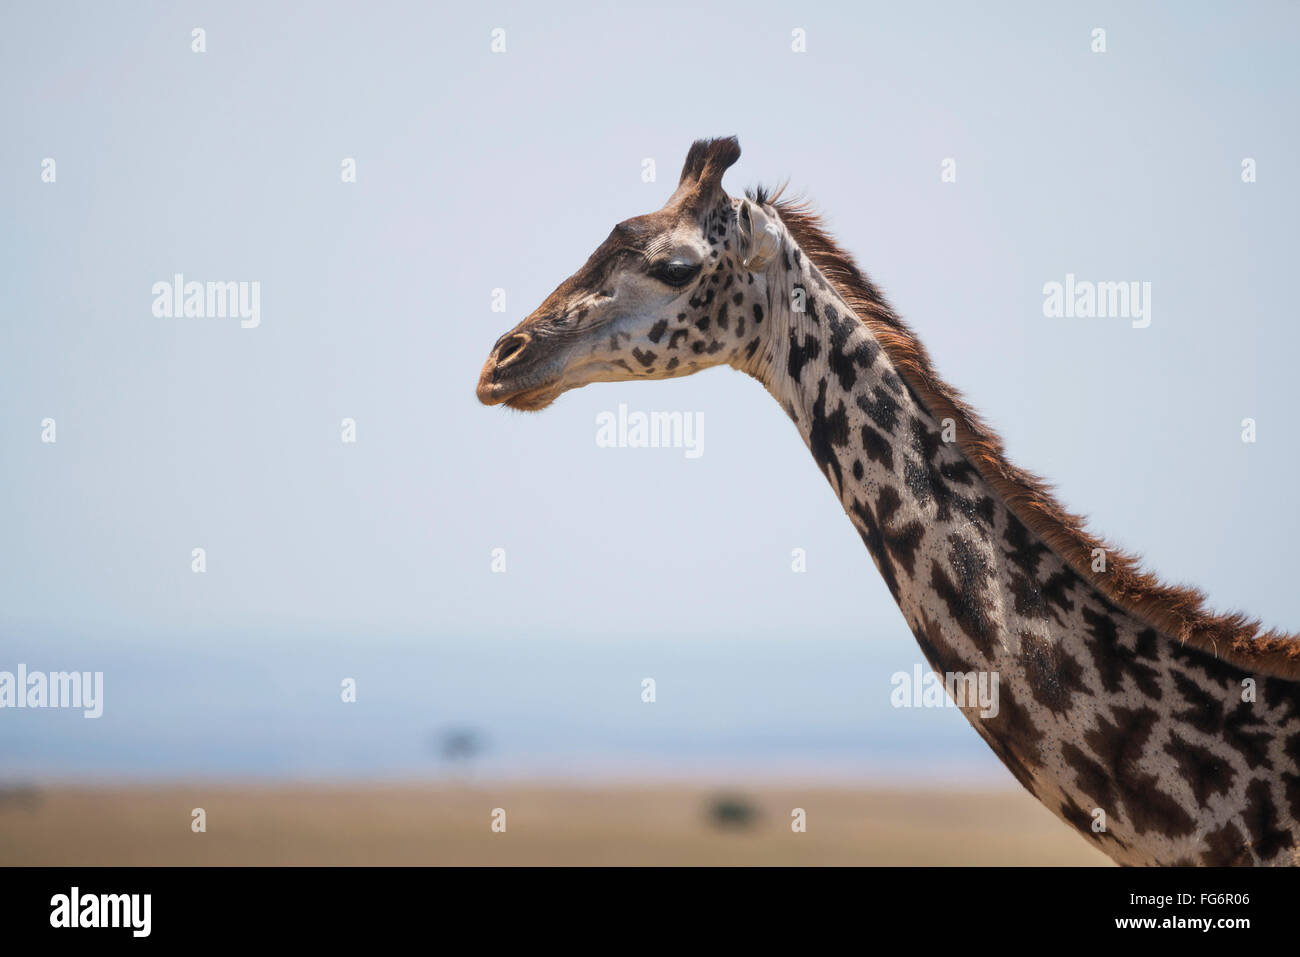 A Giraffe (Giraffa Camelopardalis) Stretches Out Its Head And Neck On The African Savannah In The Sunshine With A Couple Of Small Acacia Trees In T... Stock Photo